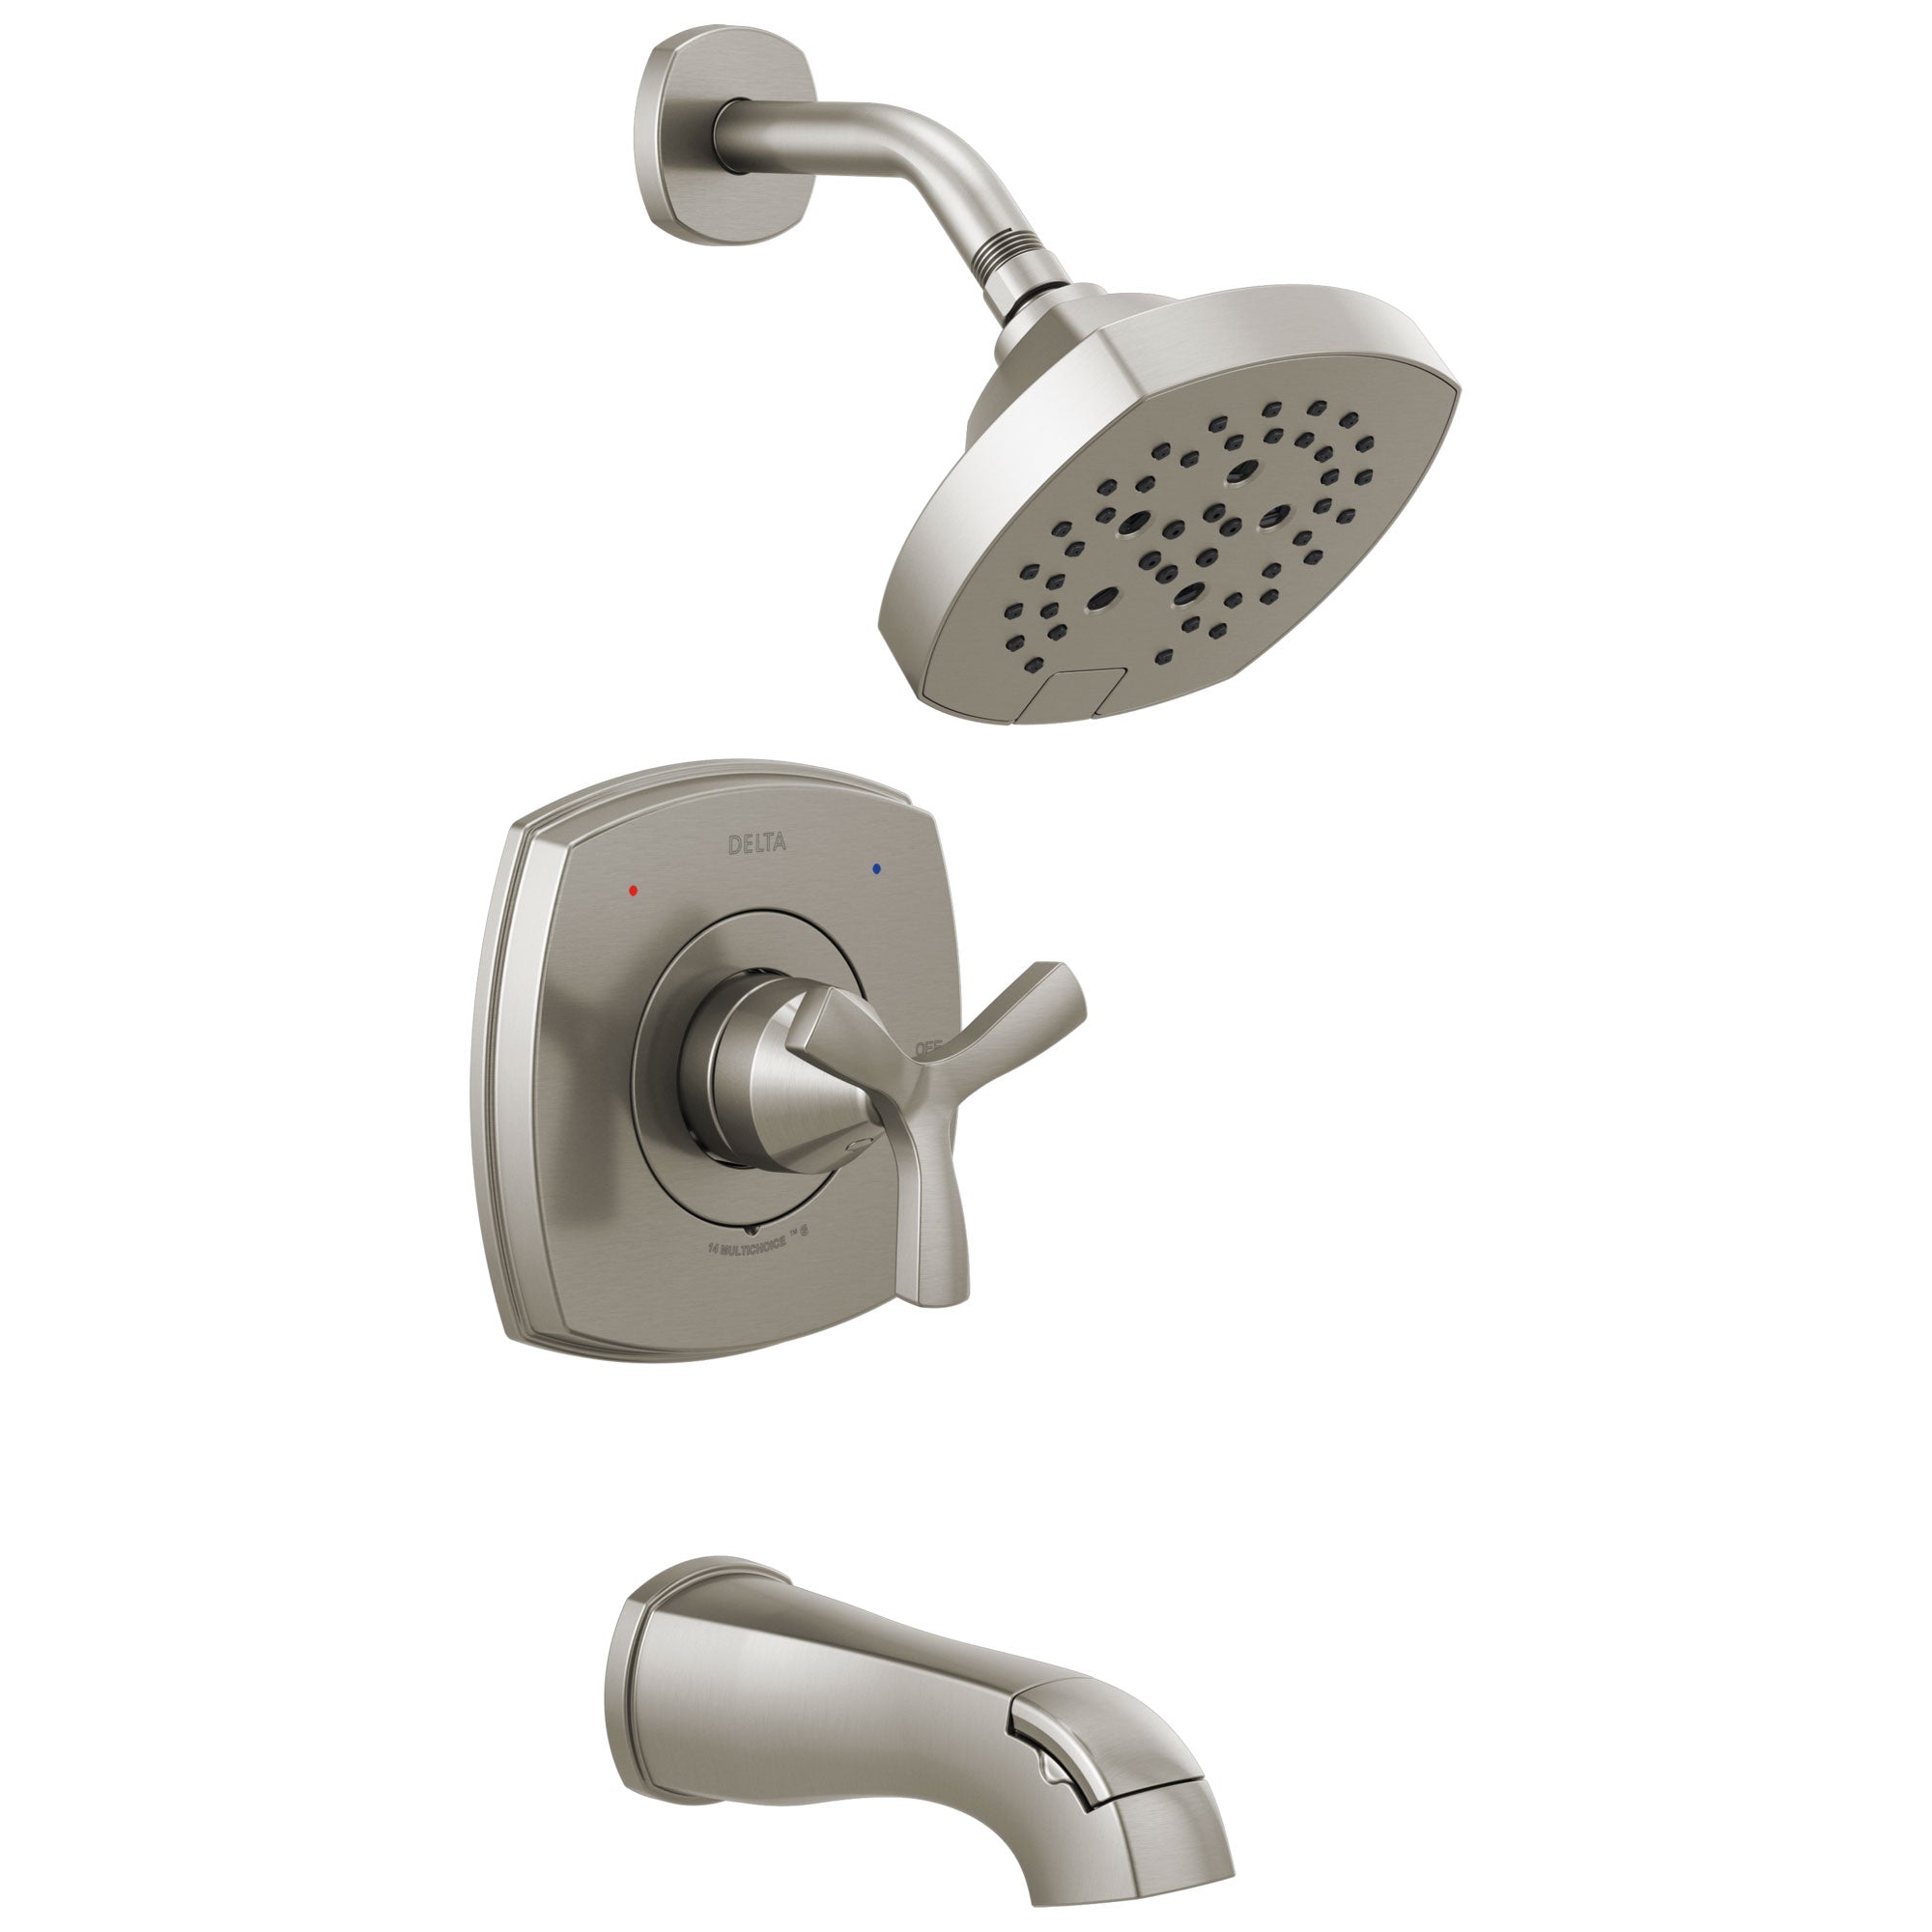 Delta Stryke Stainless Steel Finish 14 Series Tub and Shower Combination Faucet Includes Helo Cross Handle, Cartridge, and Valve with Stops D3436V